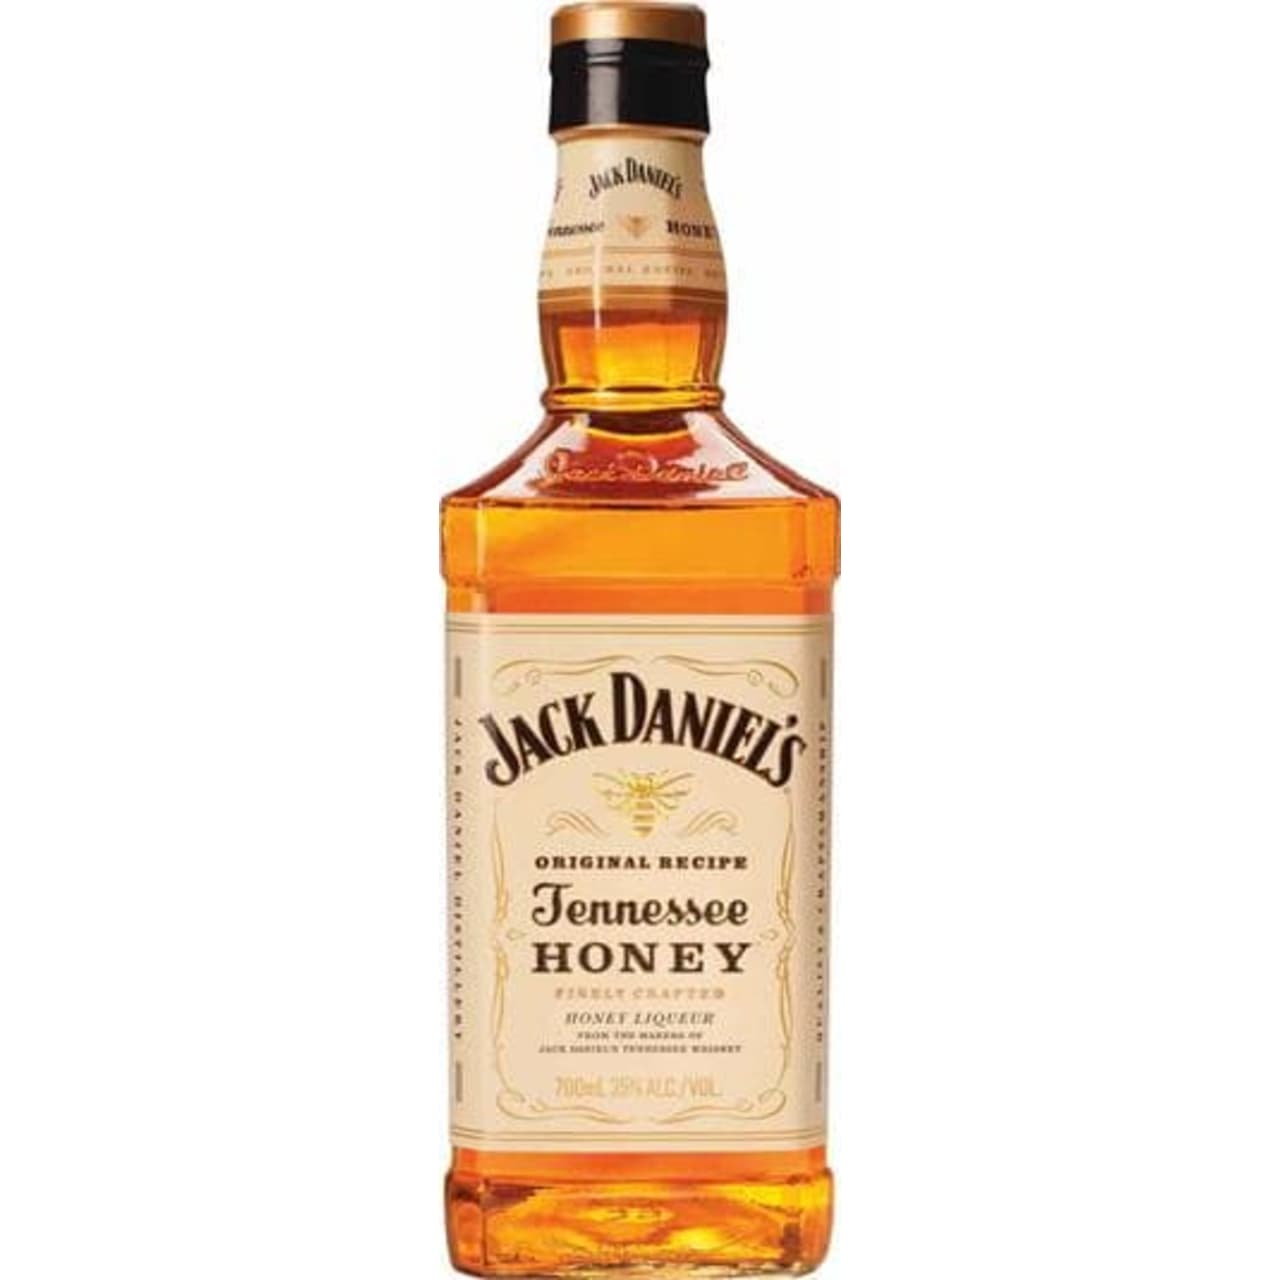 Honey Liqueur from the makers of Jack Daniel's Tennessee Whiskey. This fine Tennessee honey liqueur has the distinct character of Jack Daniels Whiskey and Liqueur notes of honey for a smooth and rewarding taste.